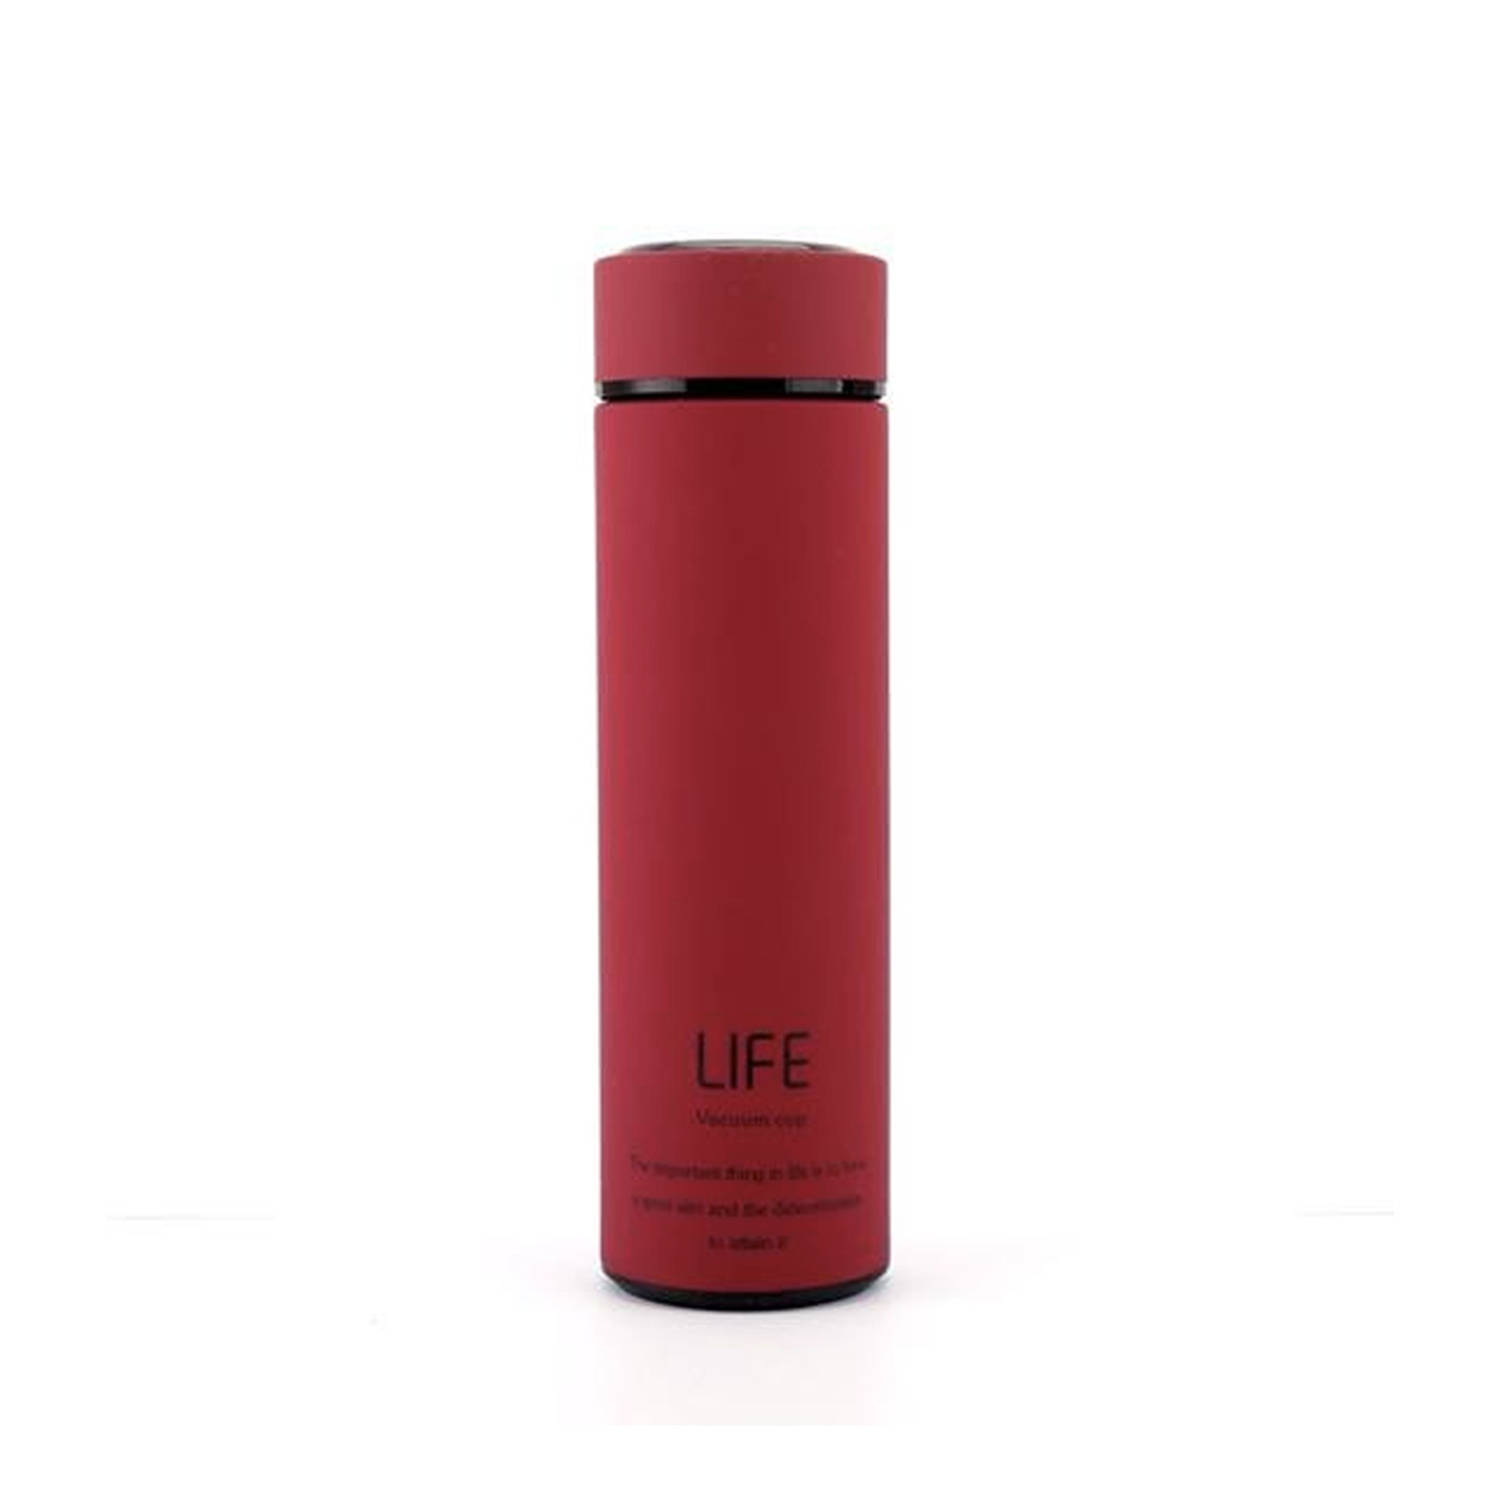 Life Thermosfles - 500ml - Inclusief Rvs Filter - Rood